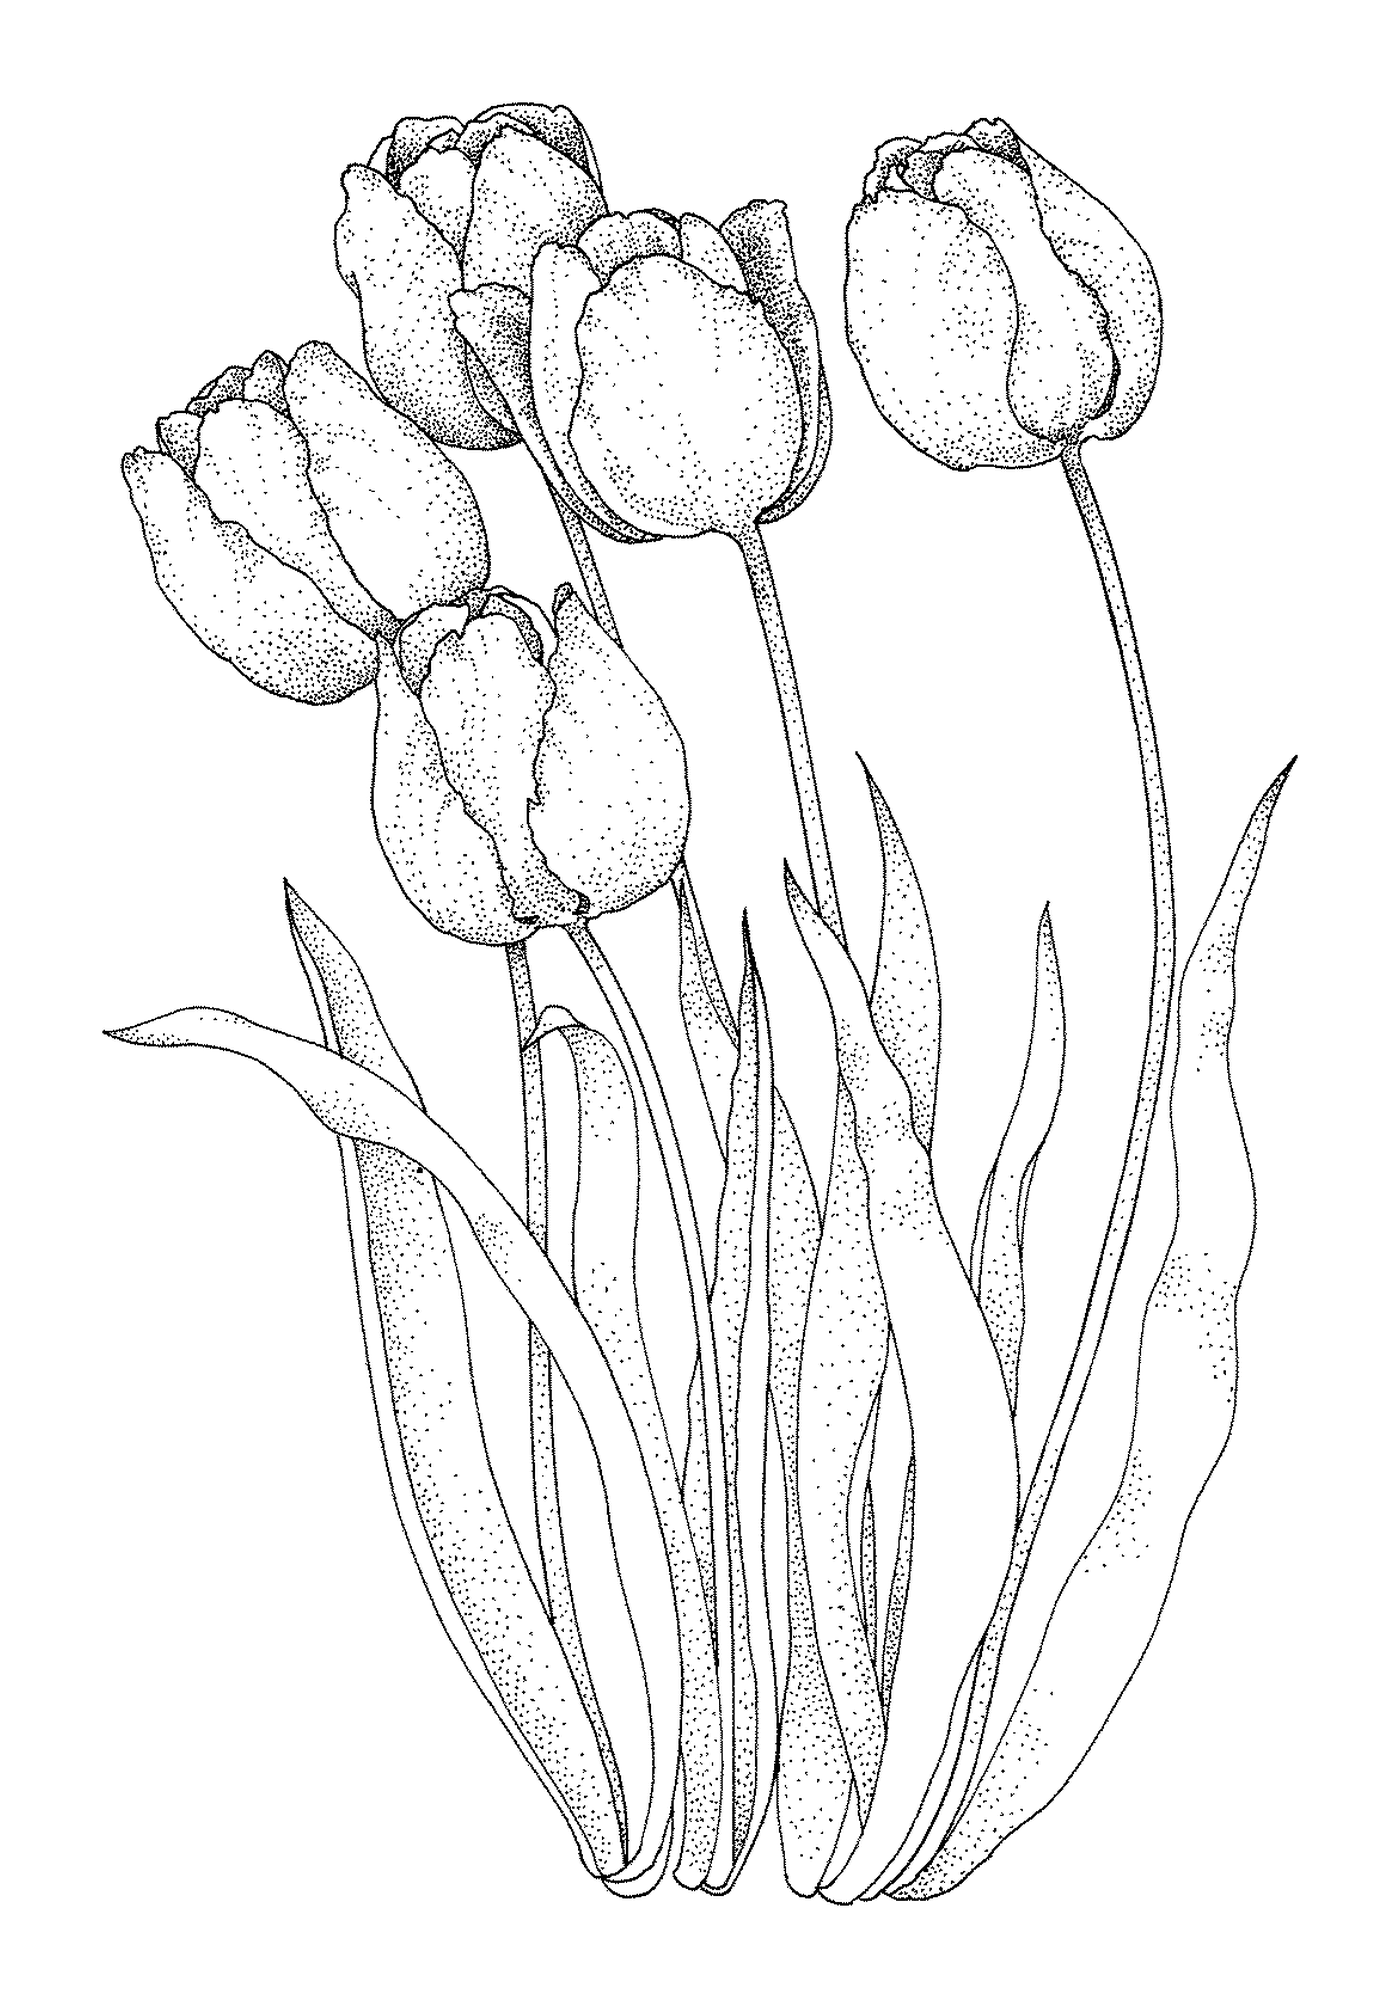  Group of flowers in grass 